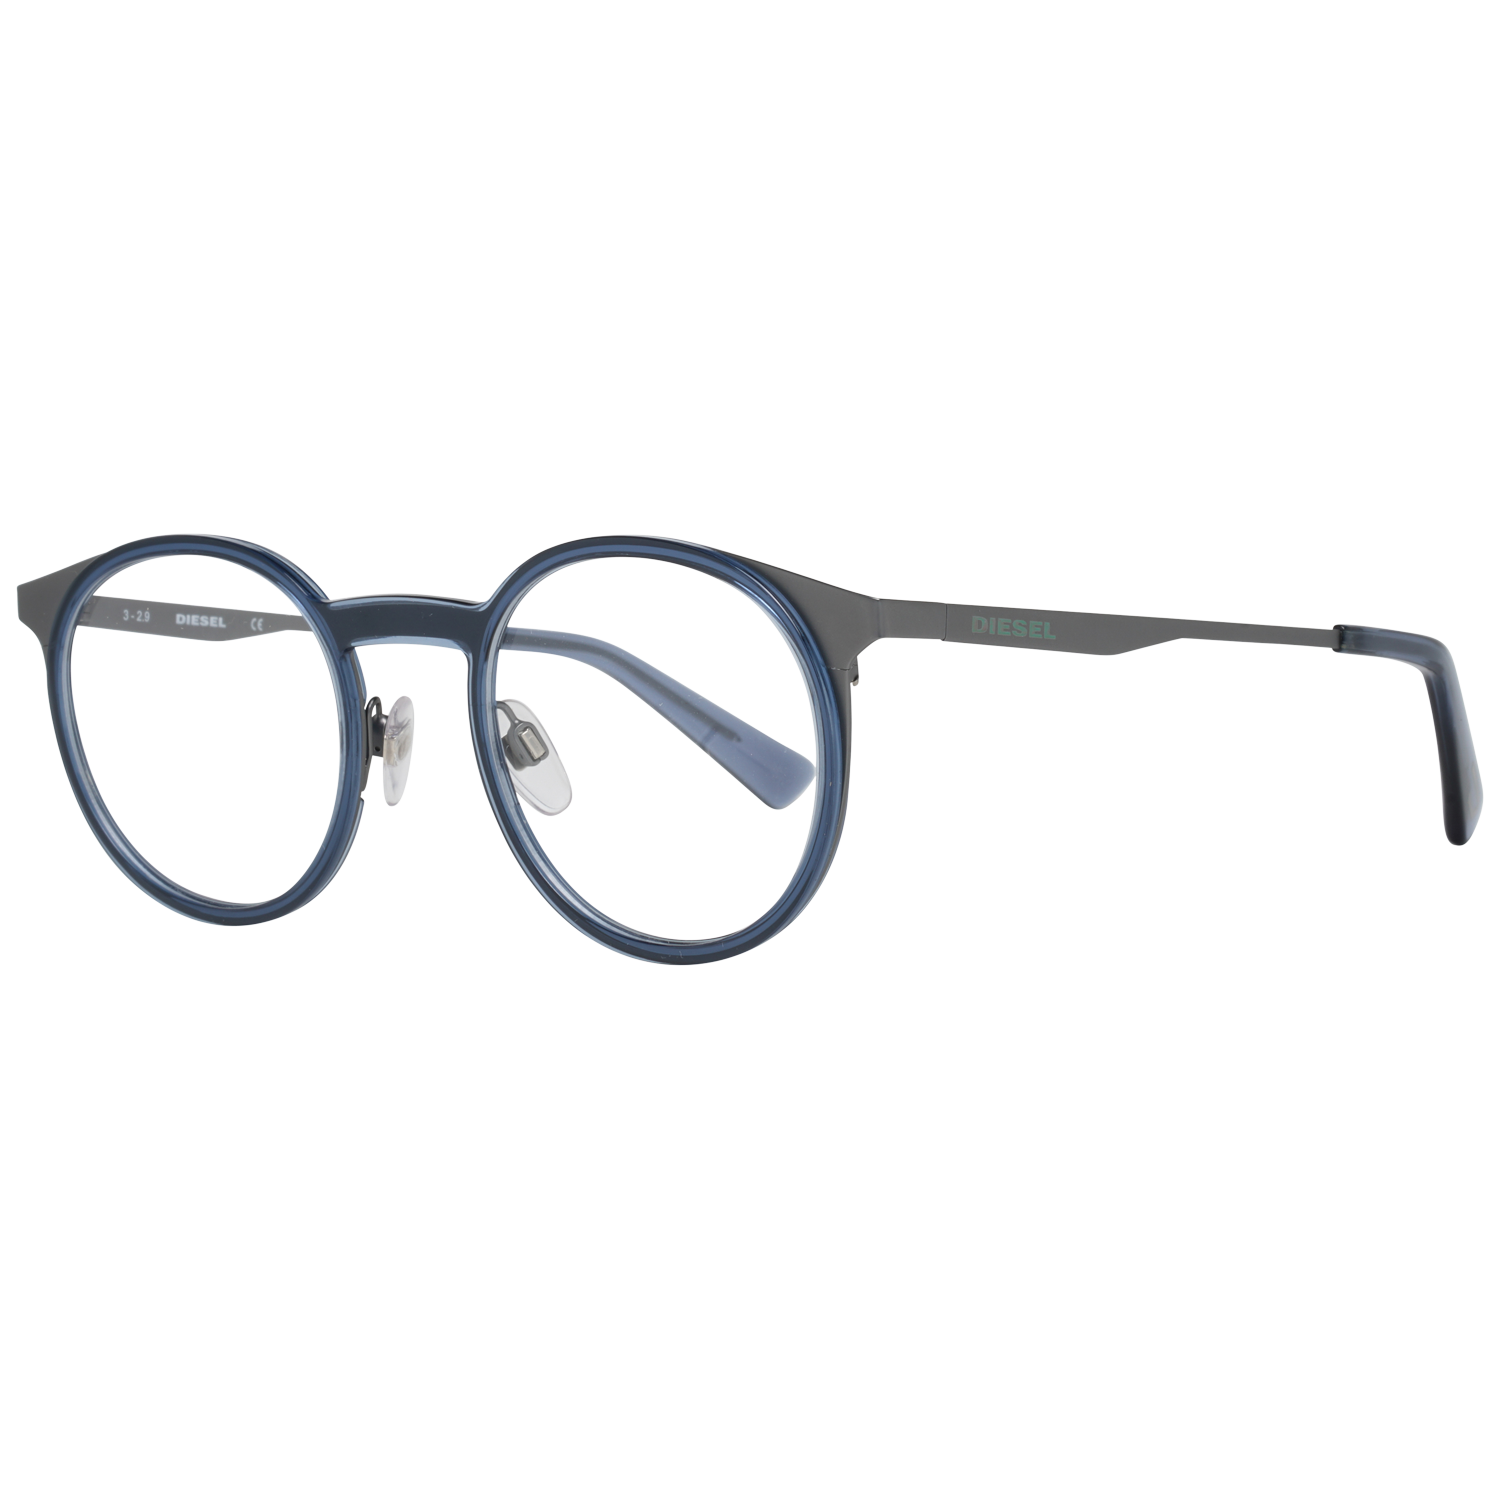 GenderUnisexMain colorBlueFrame colorBlueFrame materialMetal & PlasticSize49-22-145Lenses width49mmLenses heigth42mmBridge length22mmFrame width136mmTemple length145mmShipment includesCase, Cleaning clothStyleFull-RimSpring hingeNo